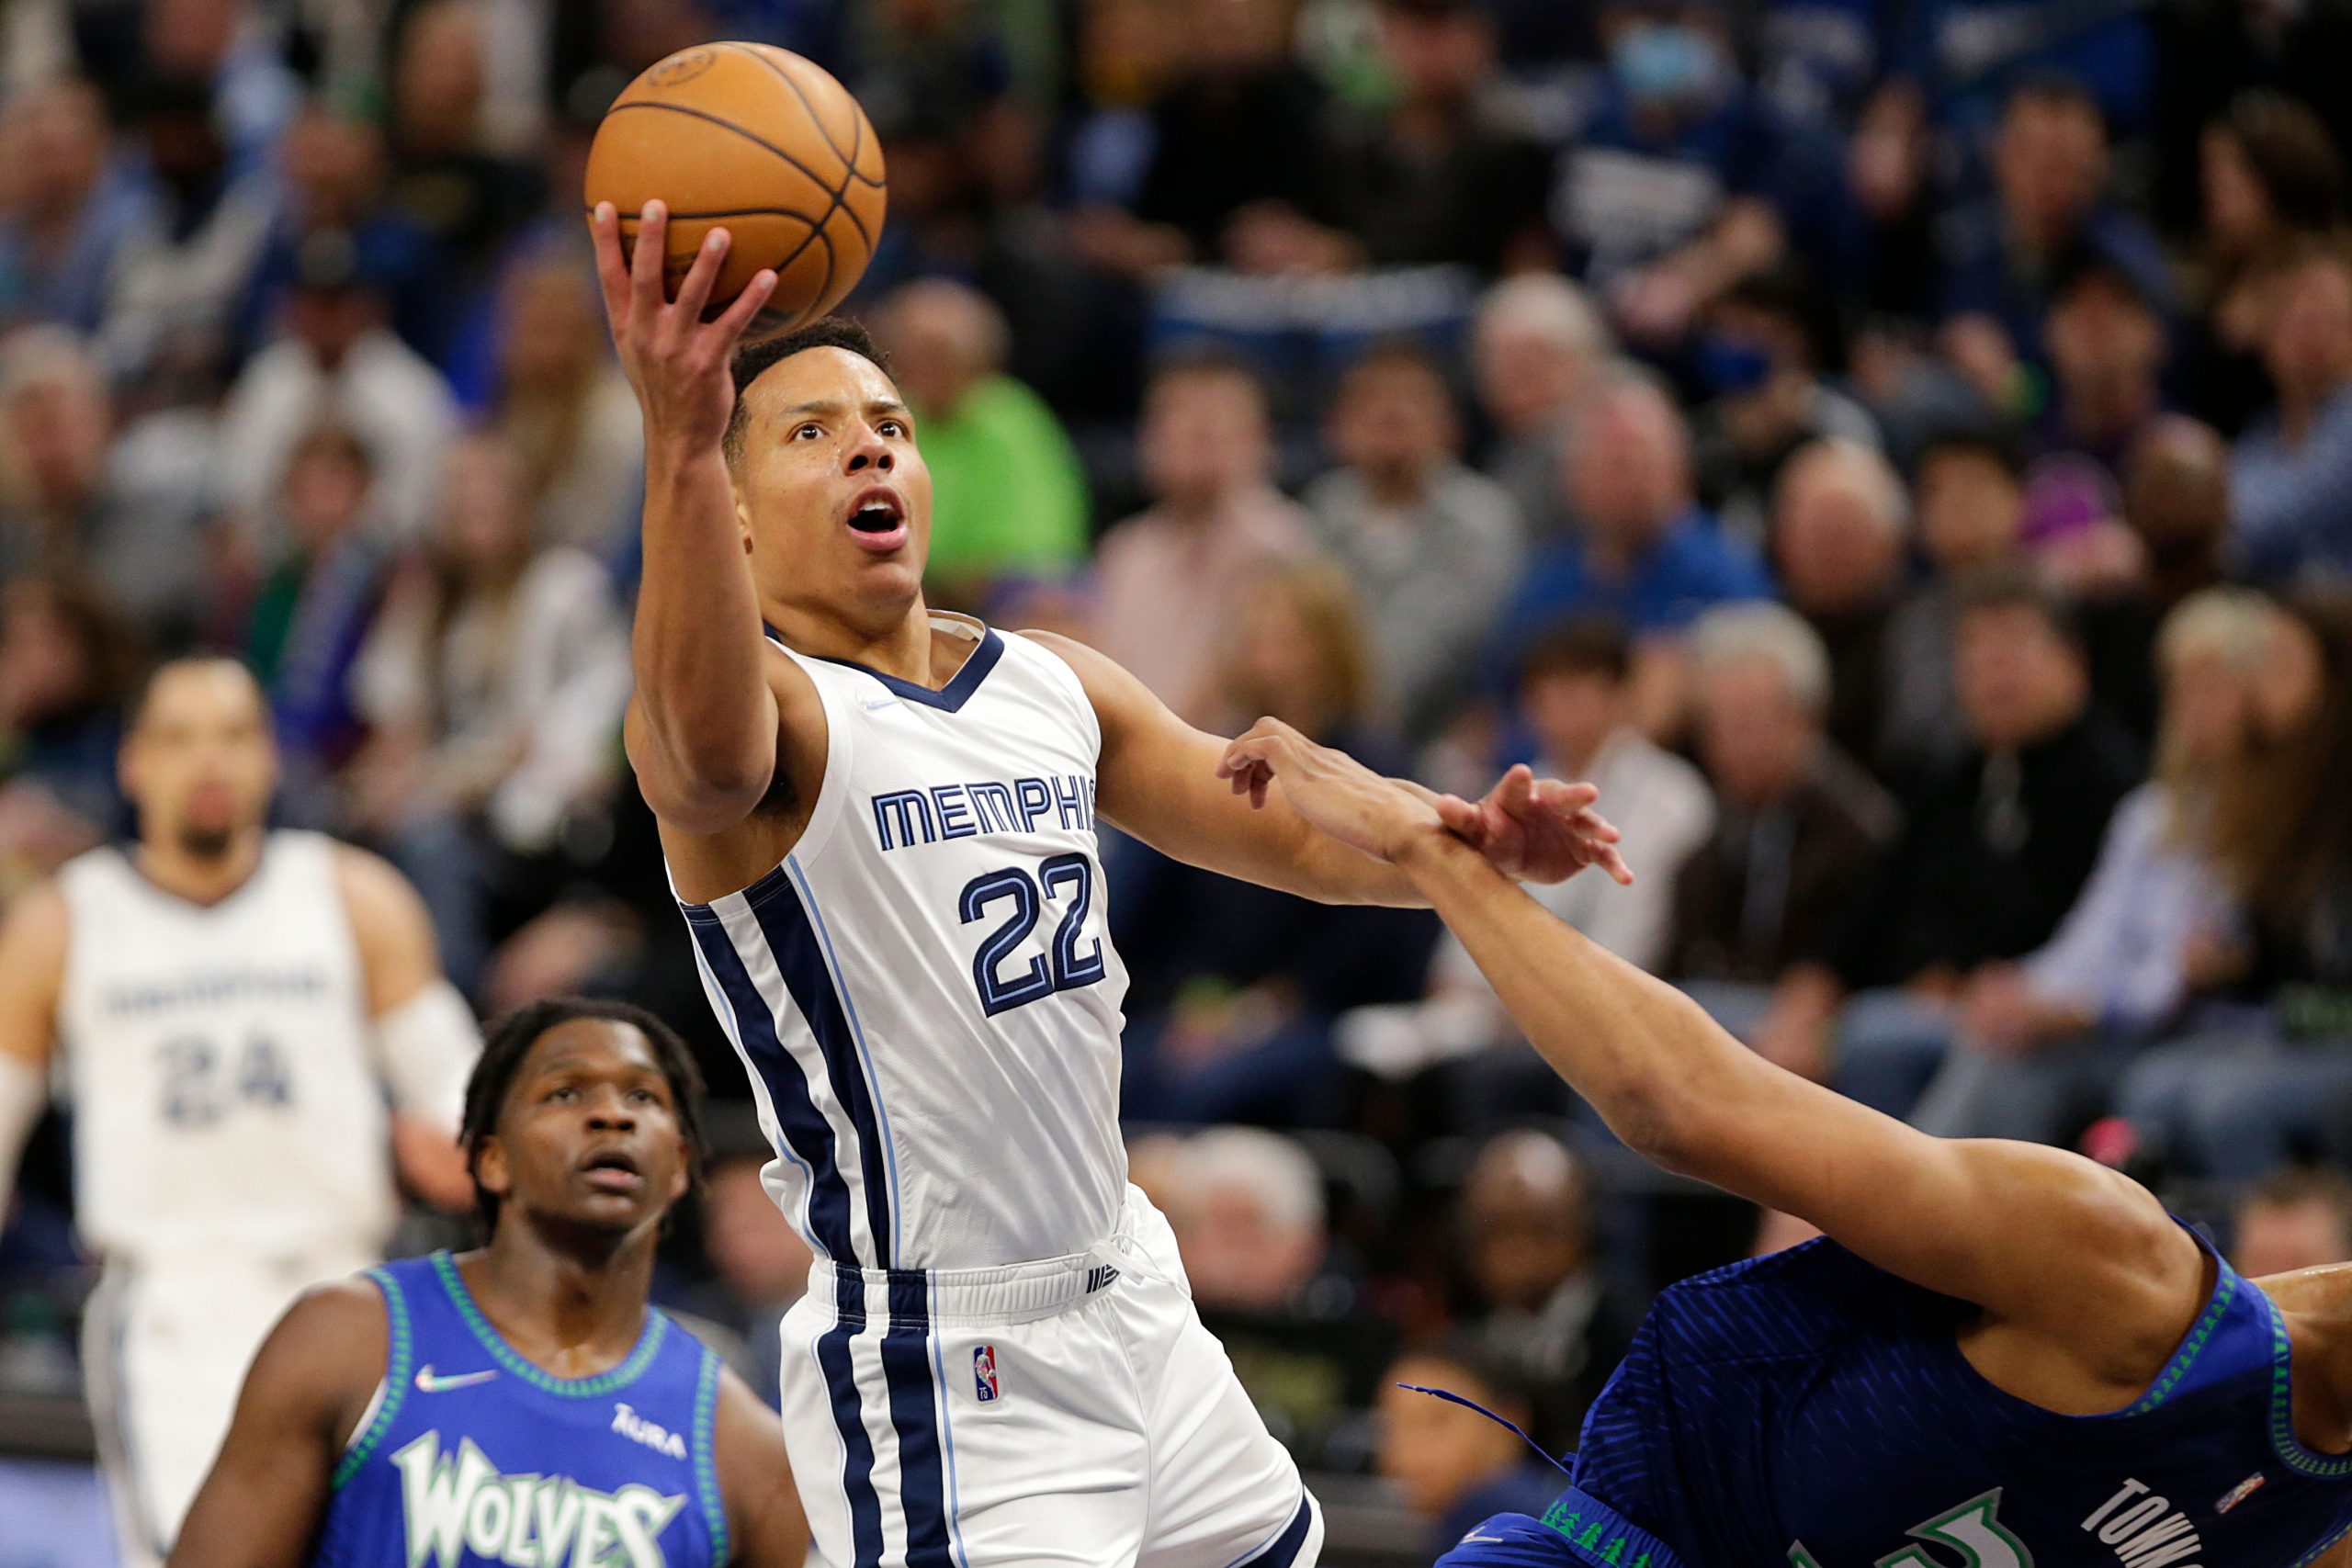 NBA: Memphis Grizzlies claw back from 26 down, beat Timberwolves in Game 3